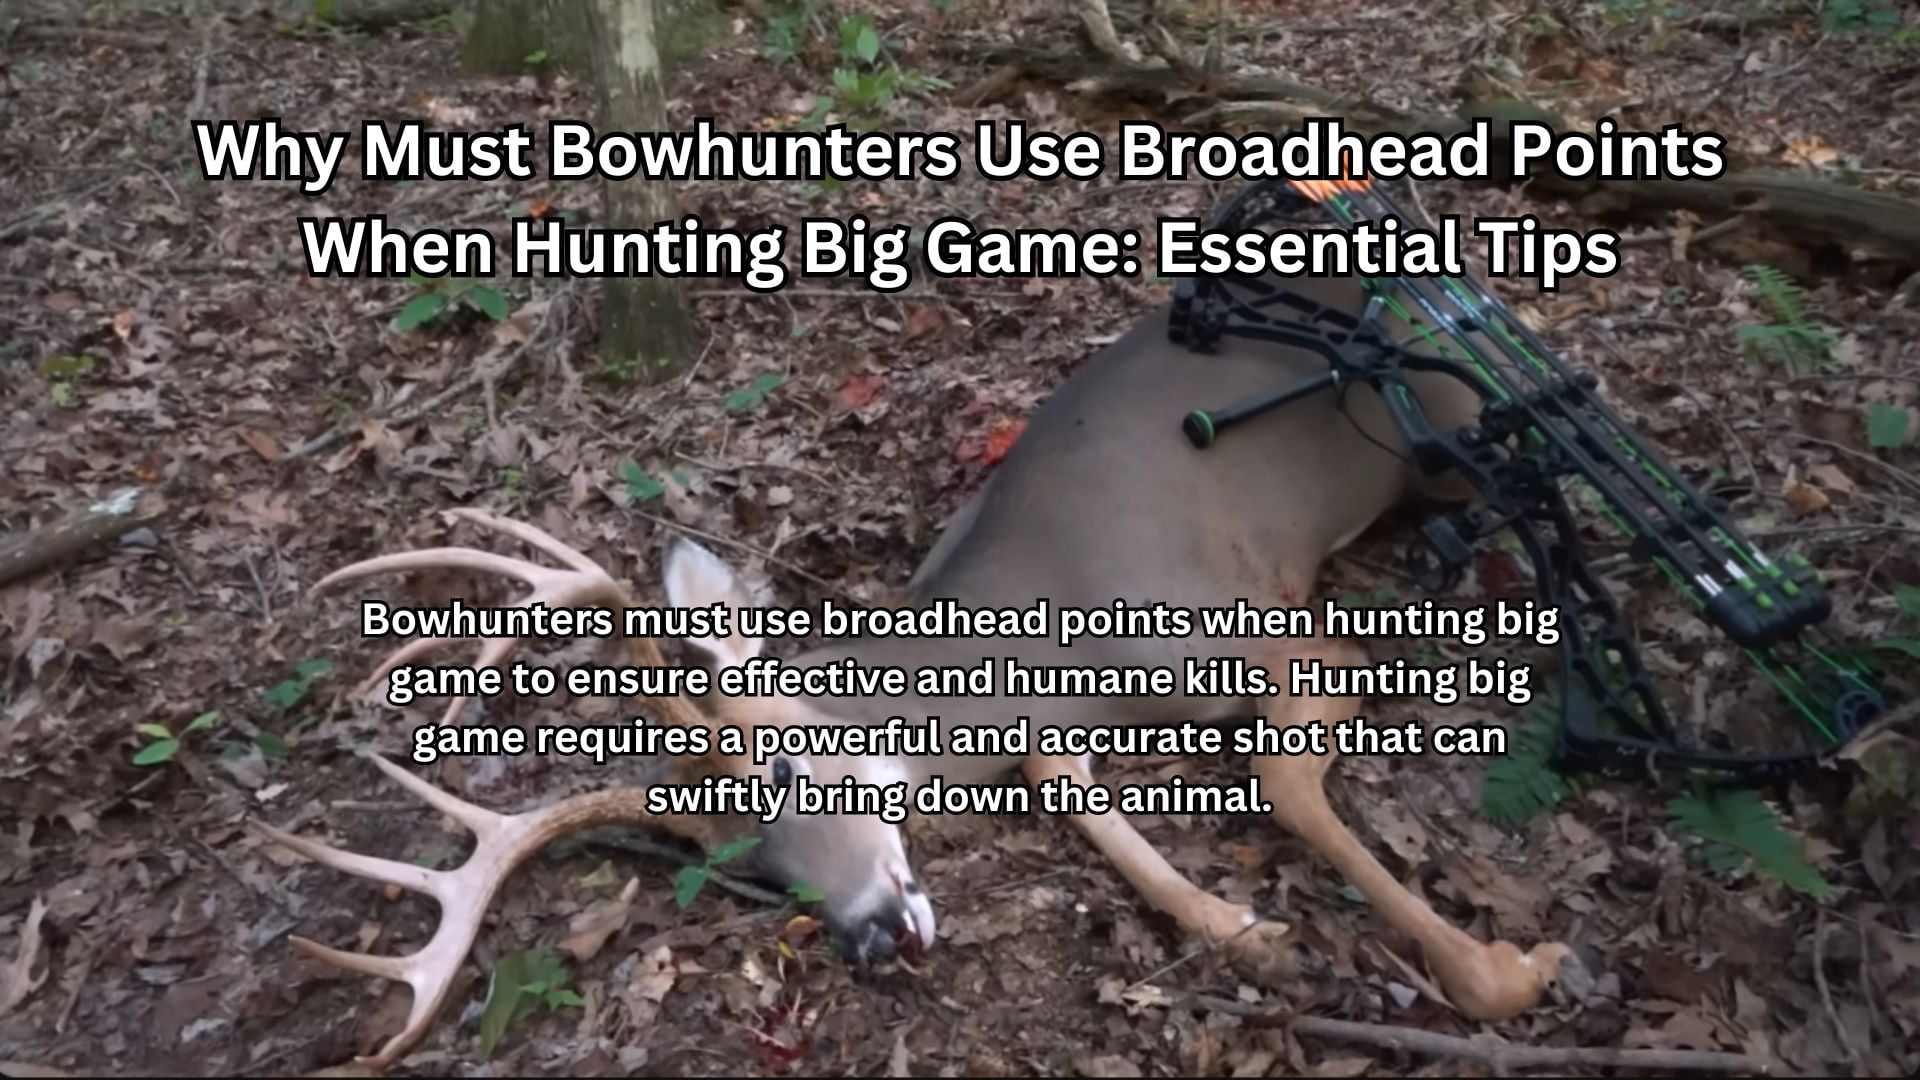 Why Must Bowhunters Use Broadhead Points When Hunting Big Game